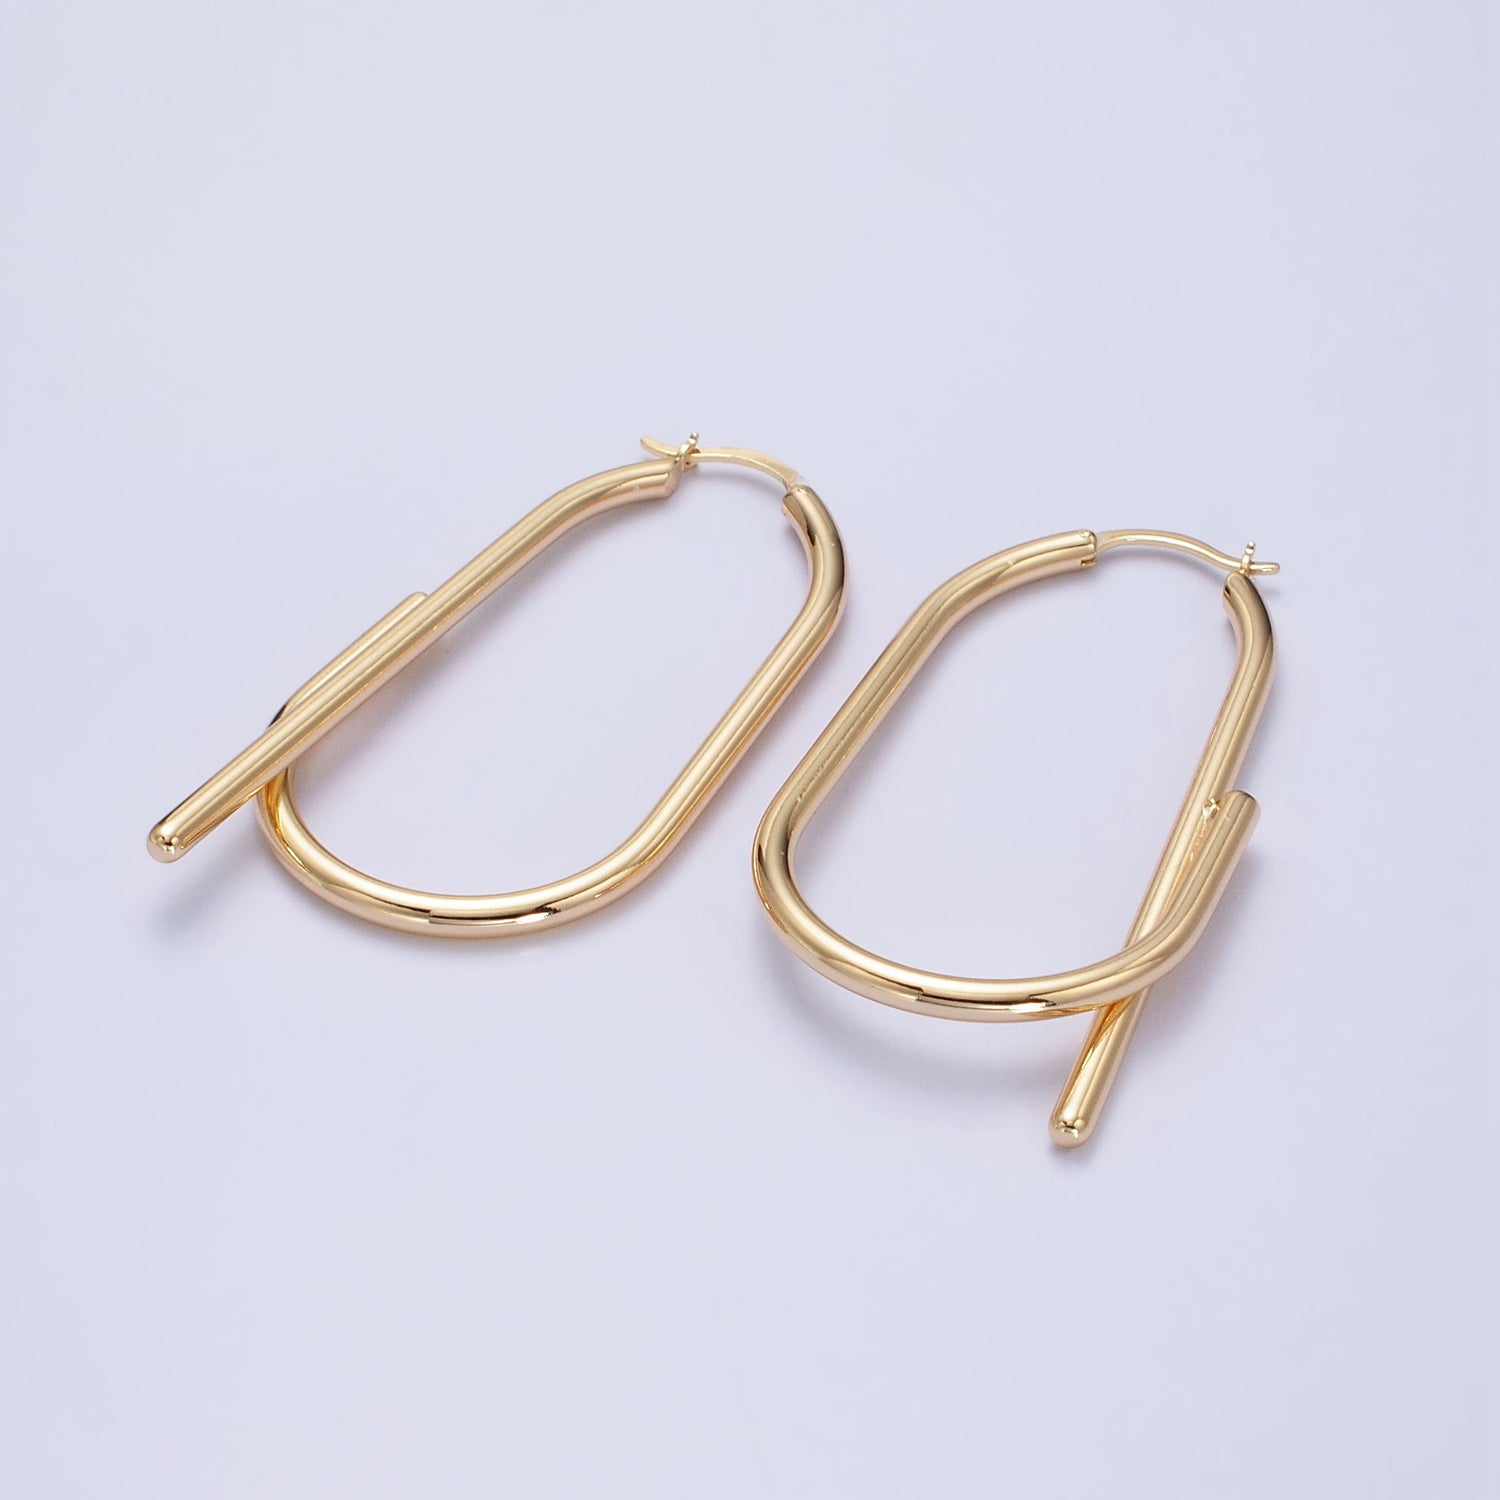 Gold Twisted Oval Hinged Hoop Earring with Hinged Closure Silver Big Oval Hoop Statement Jewelry AB733 AB942 - DLUXCA